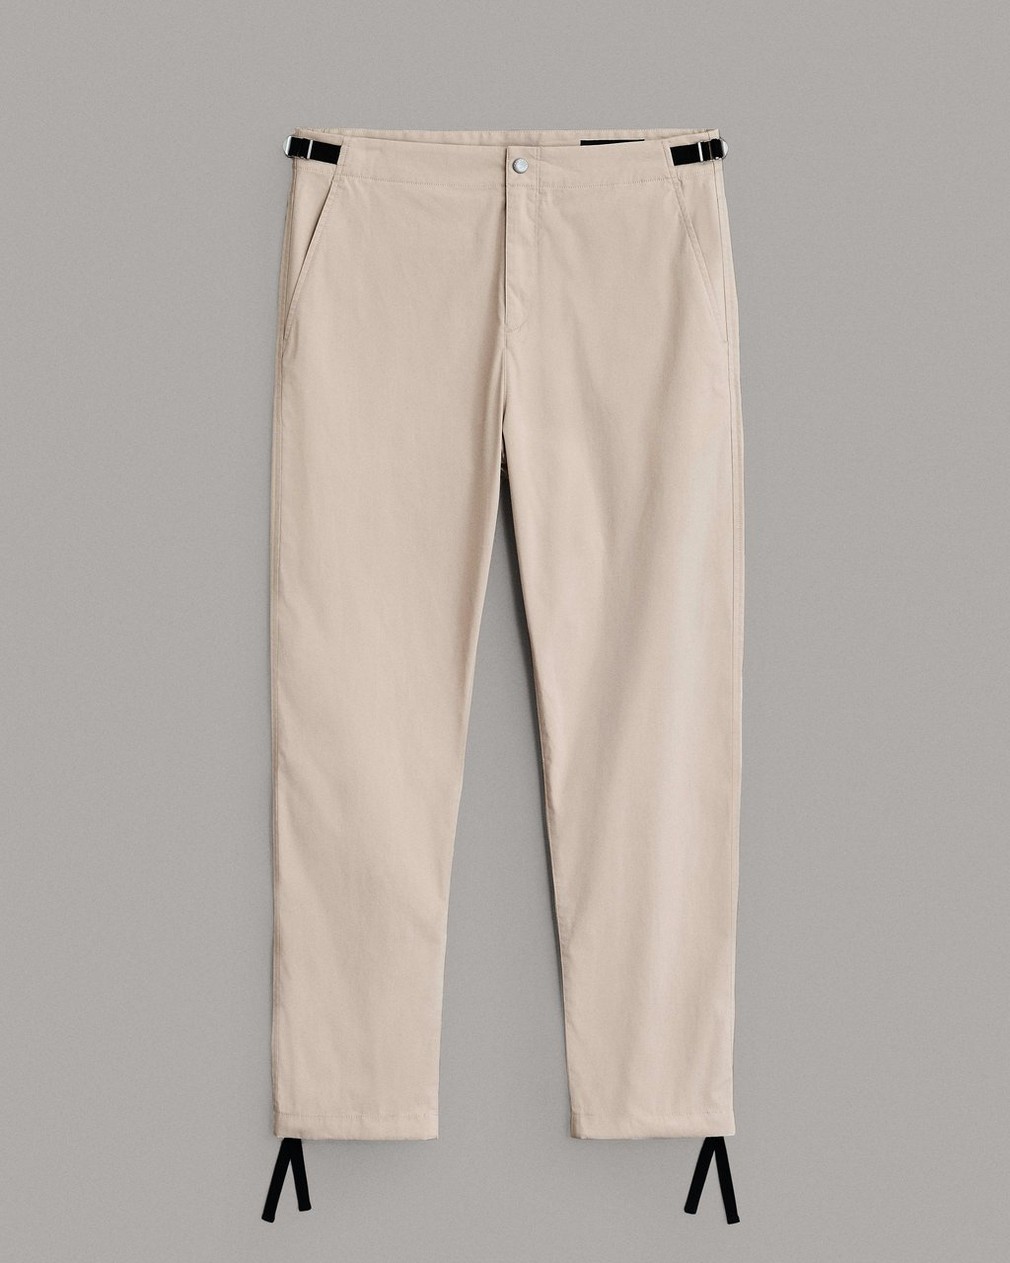 Precision Flyweight Cotton Pant